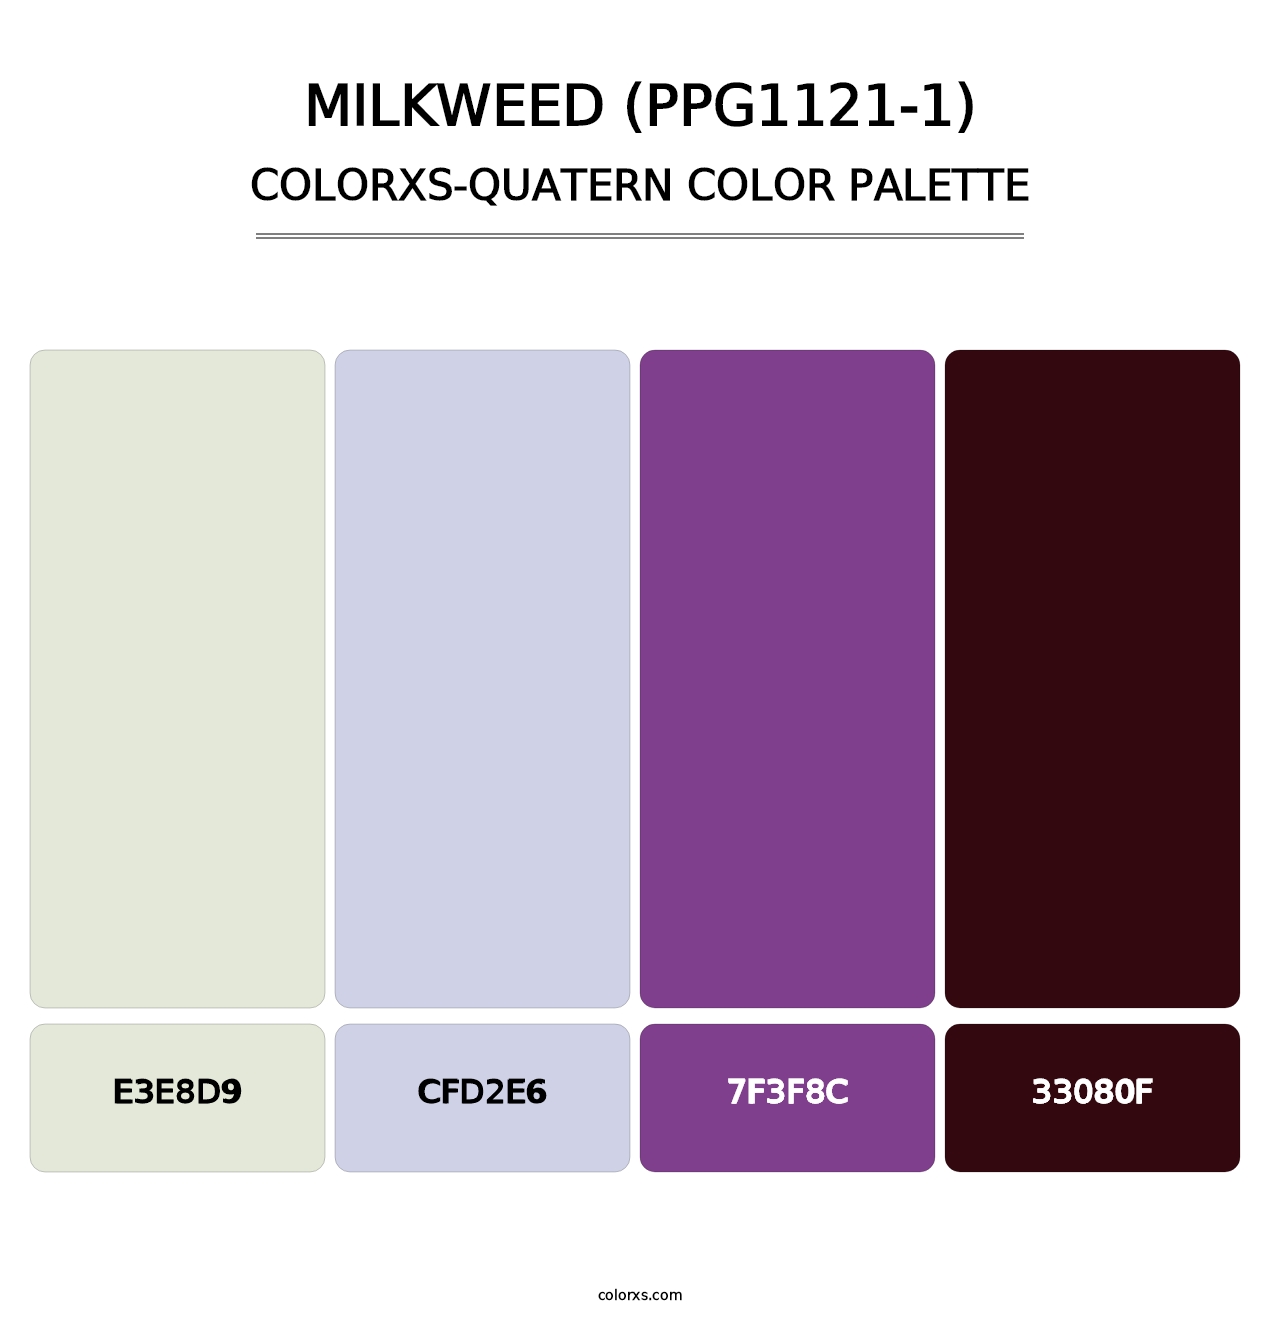 Milkweed (PPG1121-1) - Colorxs Quatern Palette